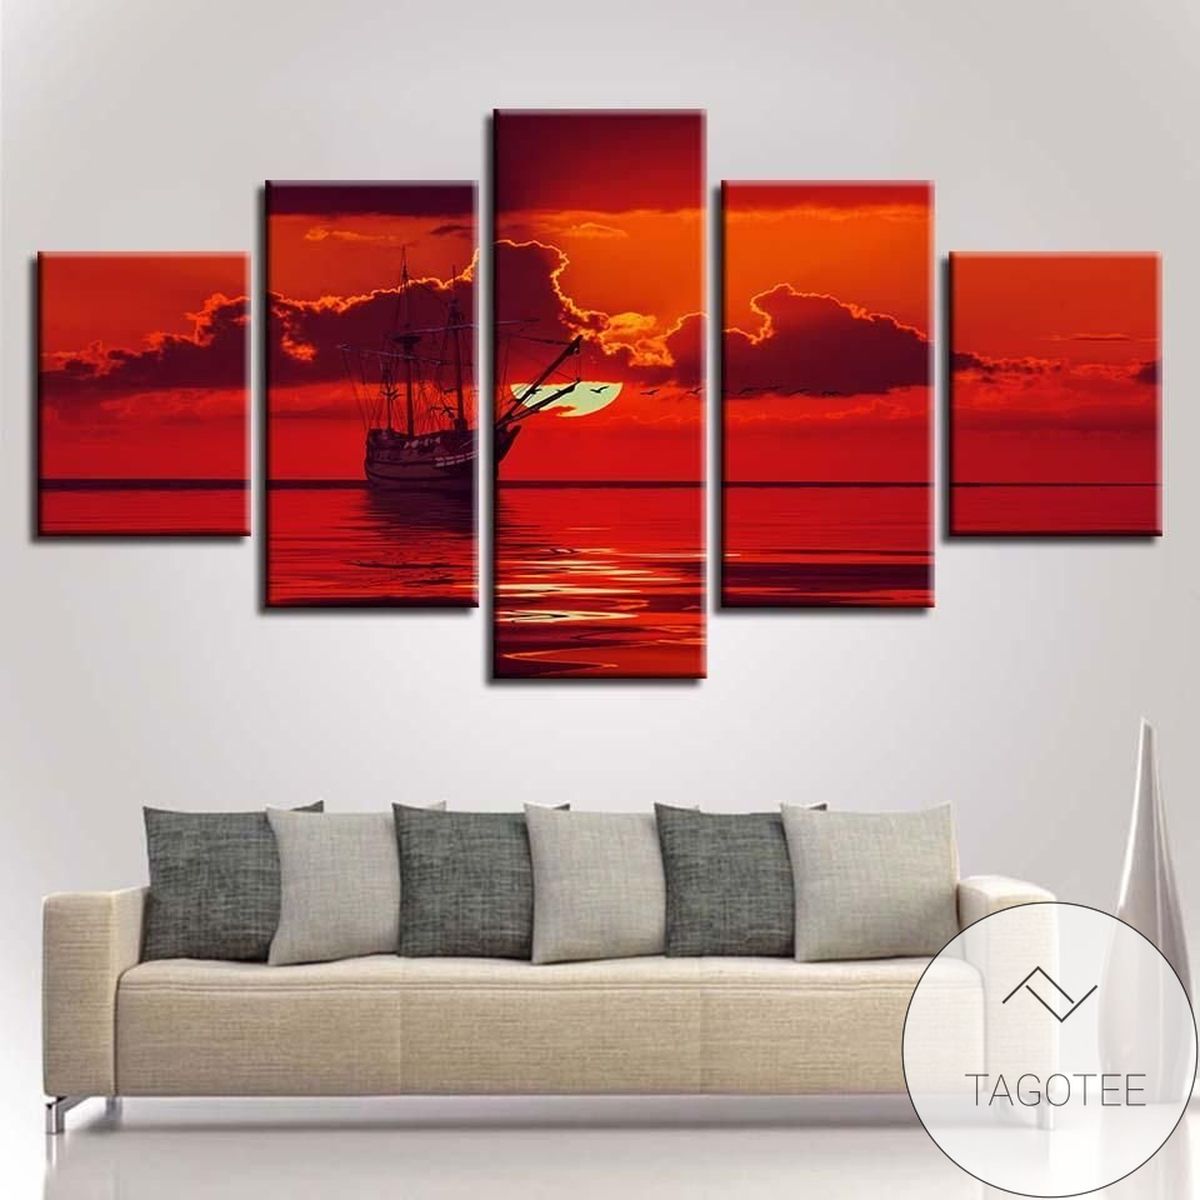 Ship And Red Sun Seascape Nature Five Panel Canvas 5 Piece Wall Art Set